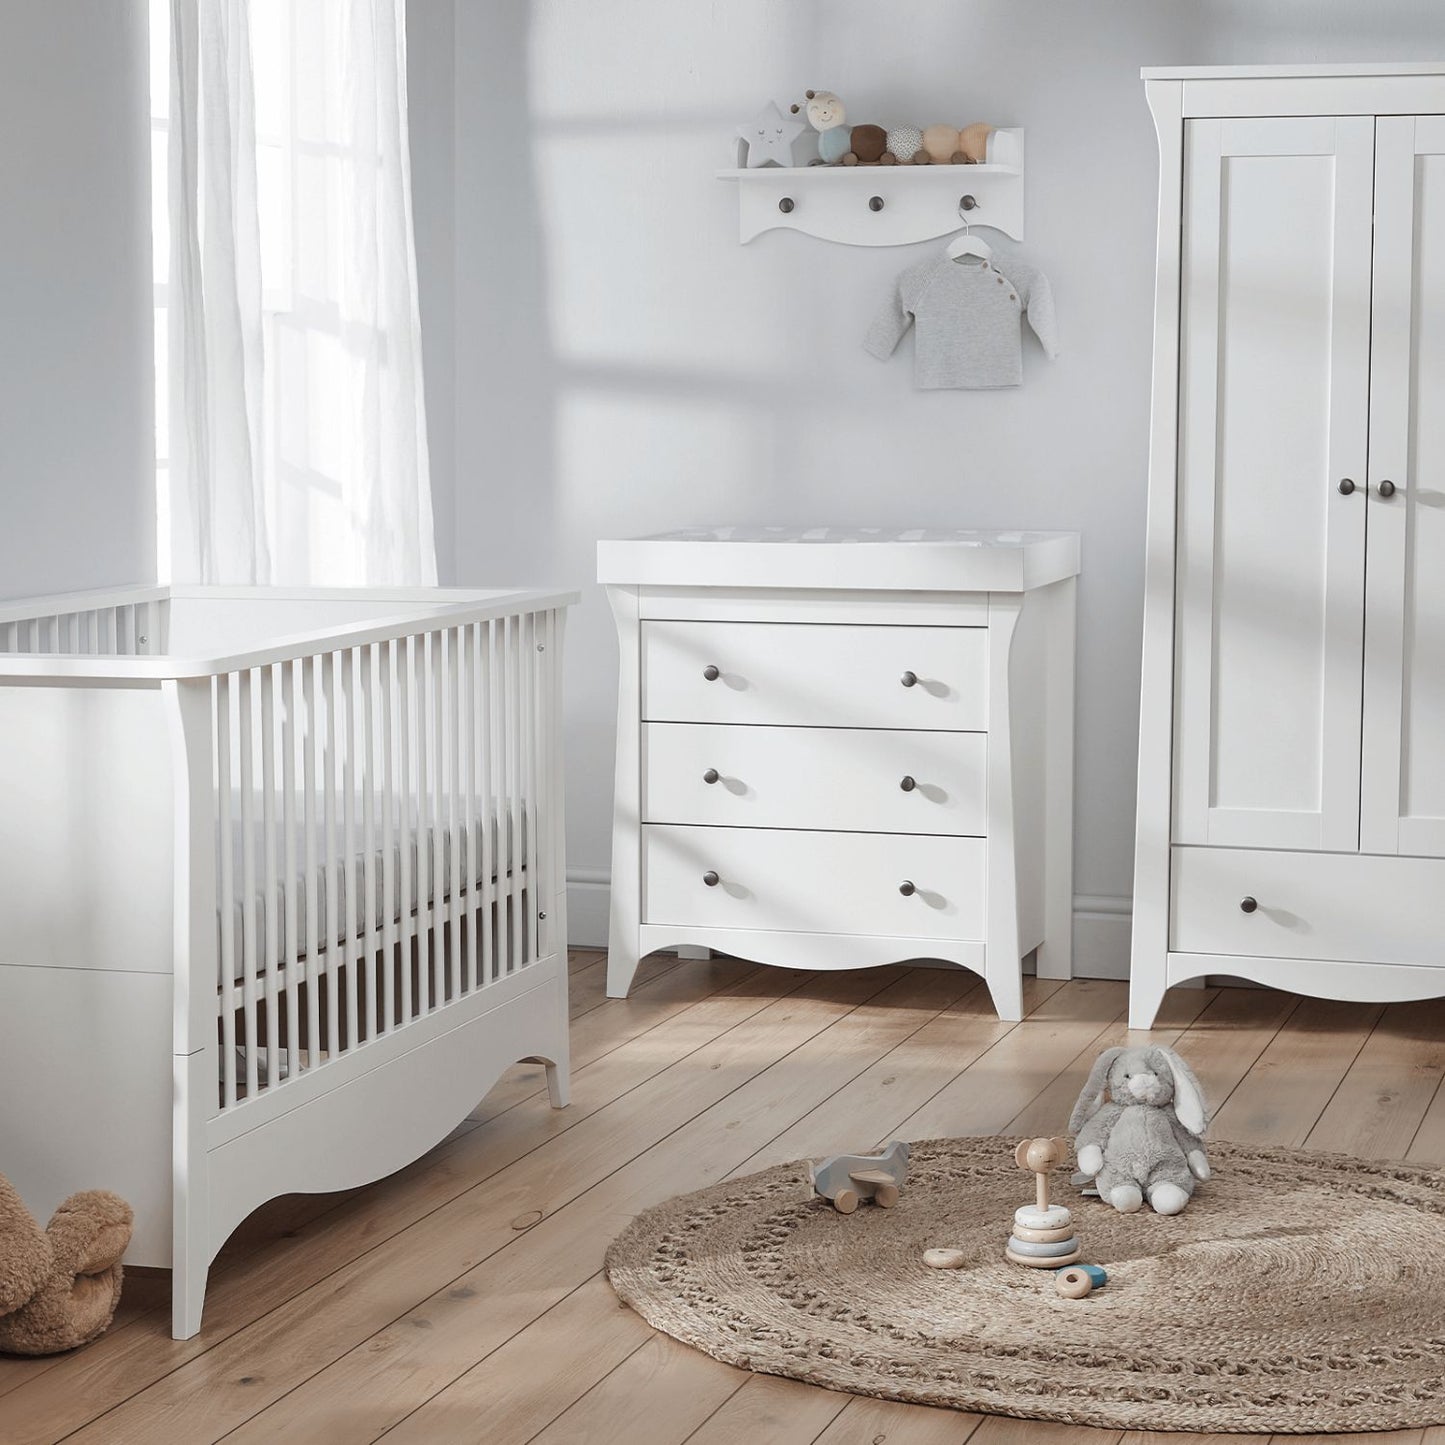 Cuddleco Clara 2pc Set 3 Drawer Dresser and Cot Bed White -  NEW EDLP